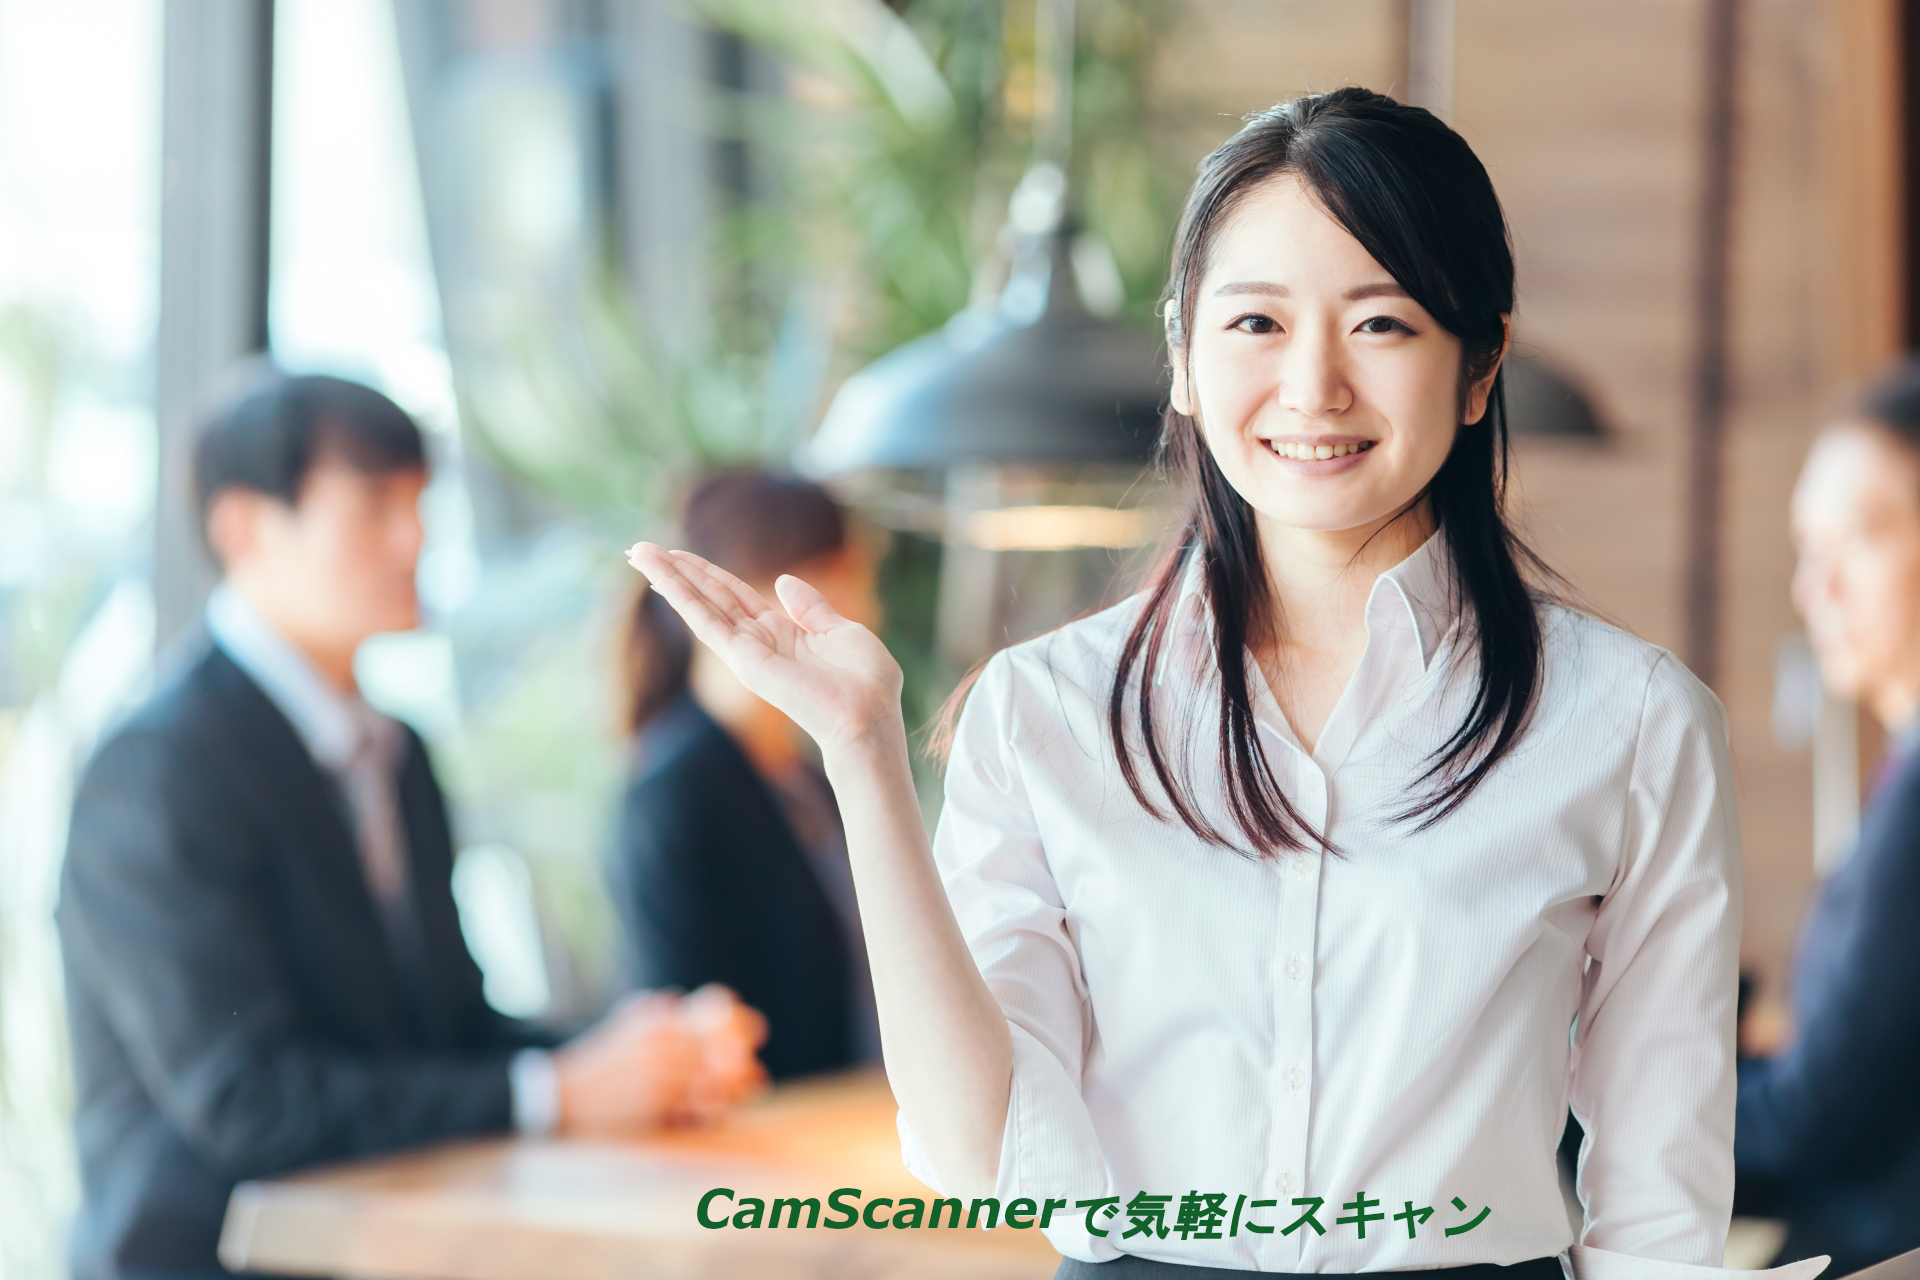 CamScannerで気軽にスキャン